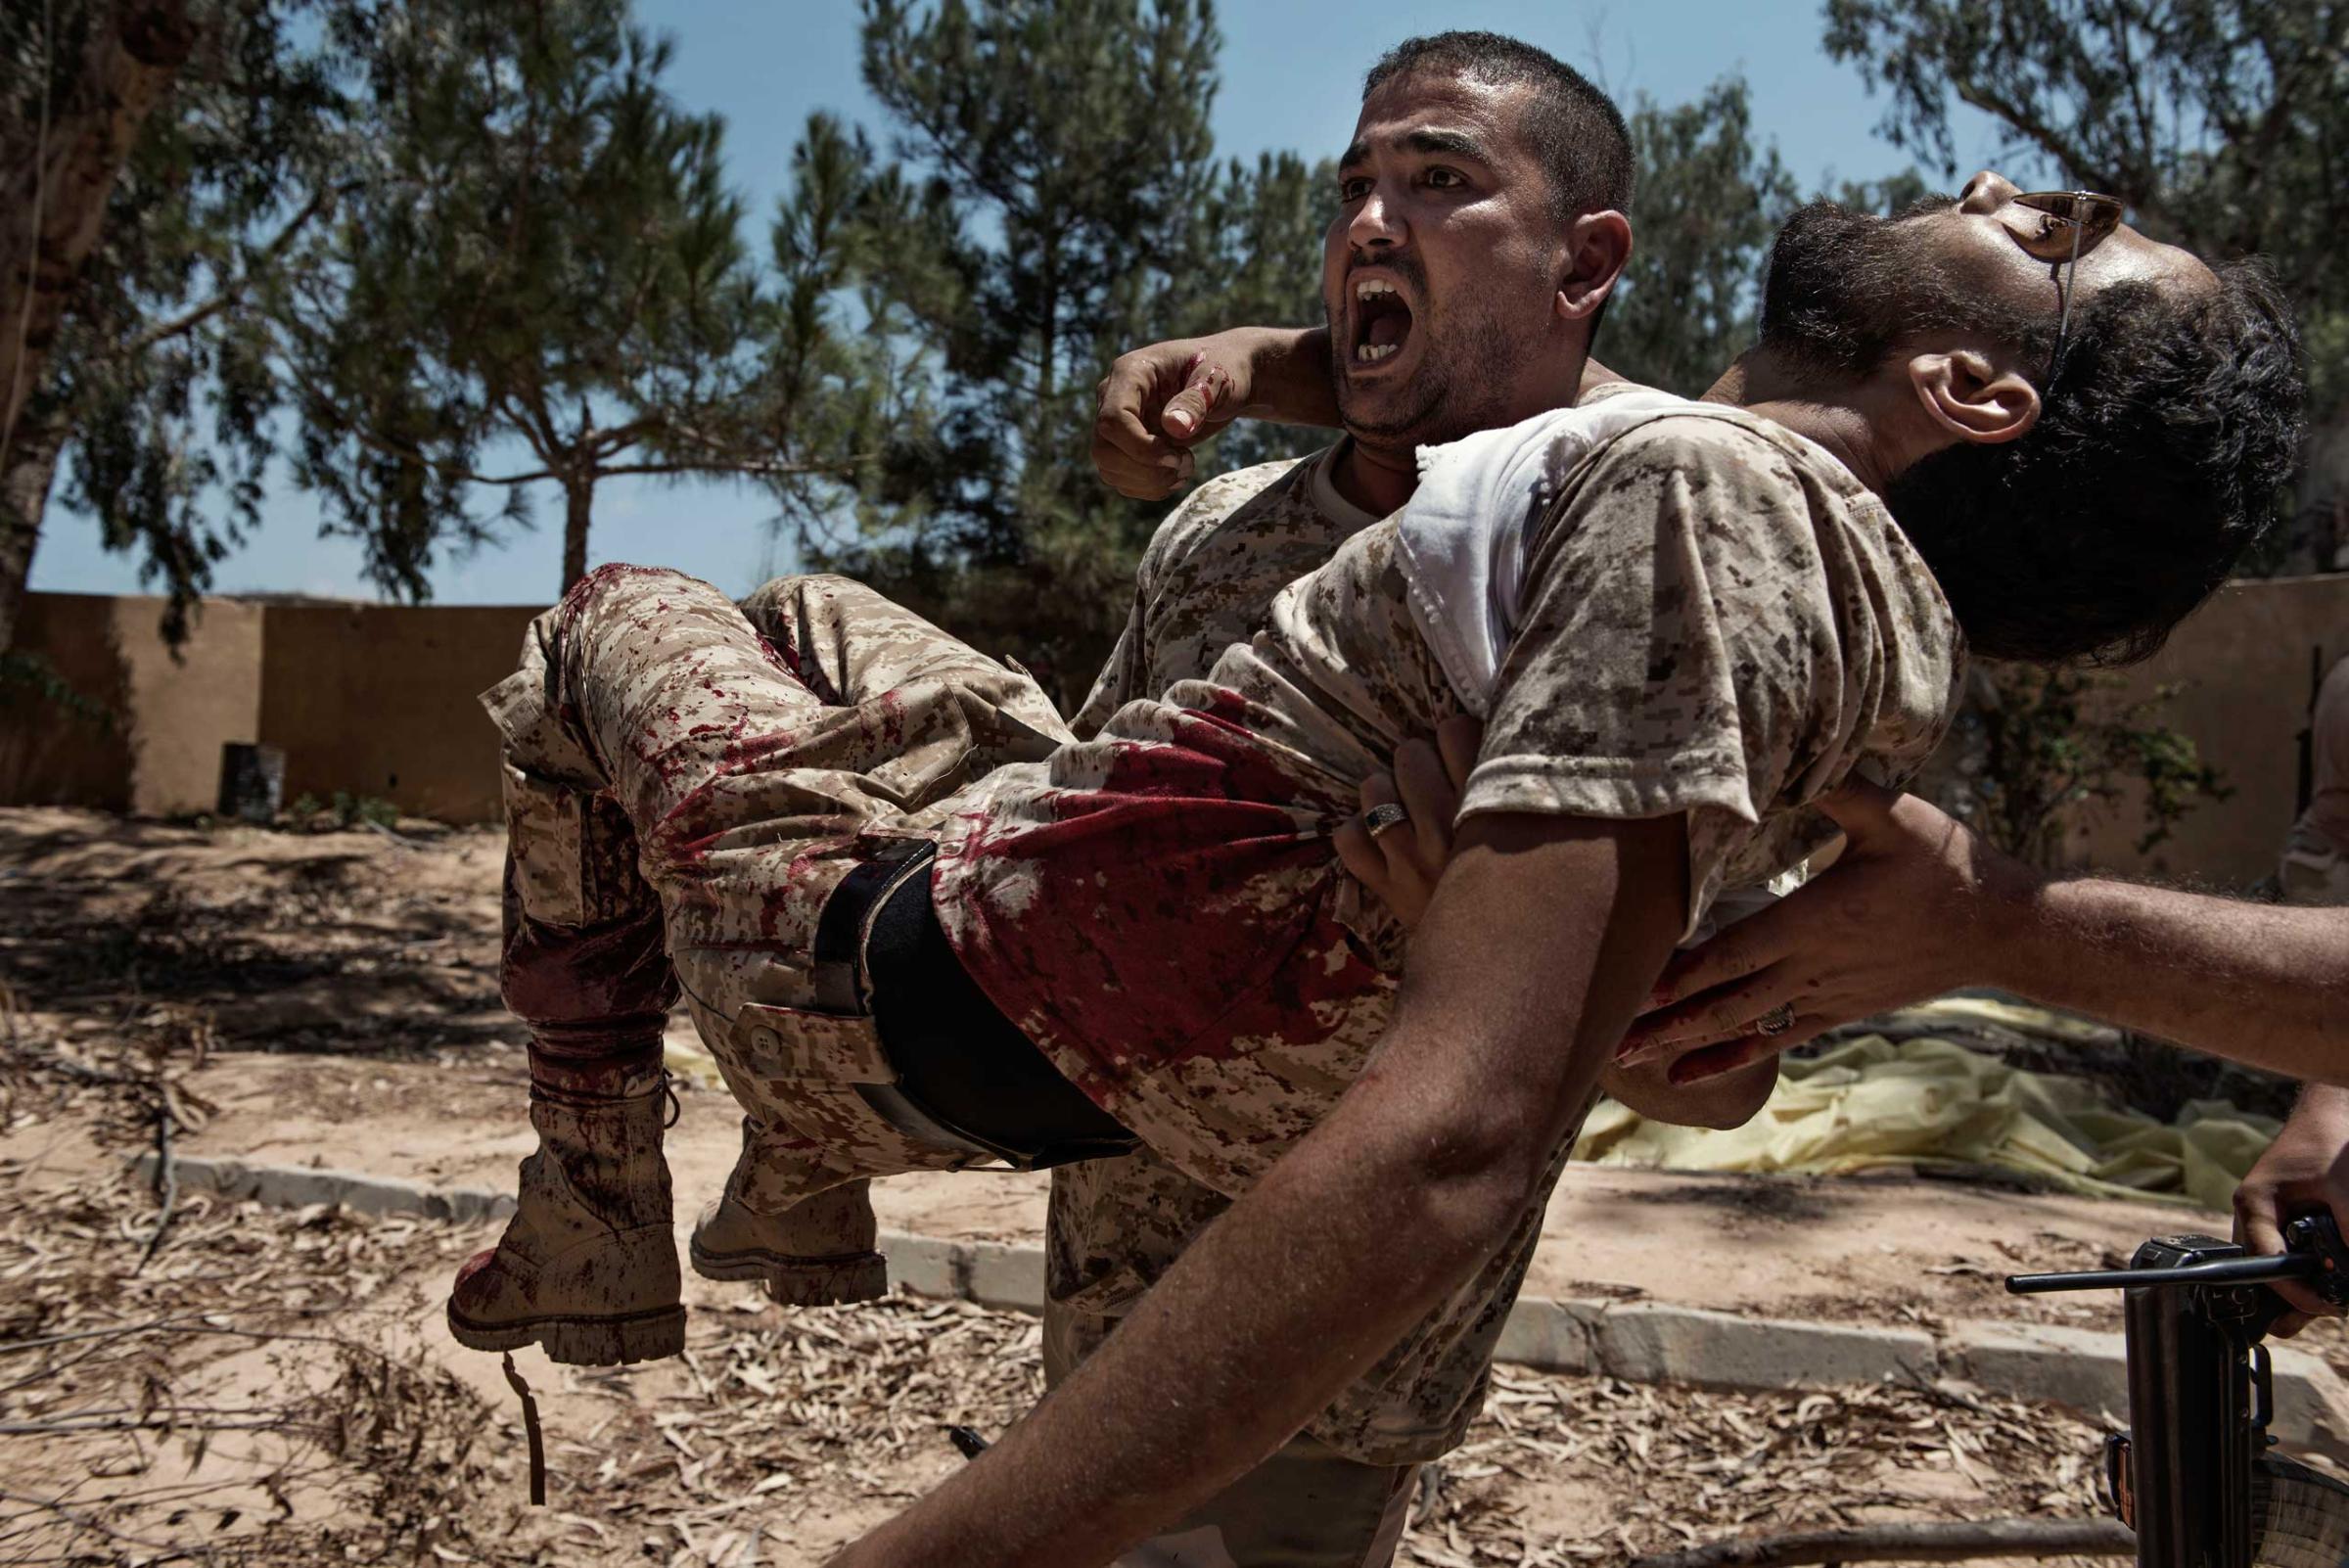 Libya, Sirte: A fighter of the Libyan forces affiliated to the Tripoli government carries a comrade who was seriously injured just seconds before by a booby trap placed by ISIS fighters on July 14, 2016. Alessio Romenzi